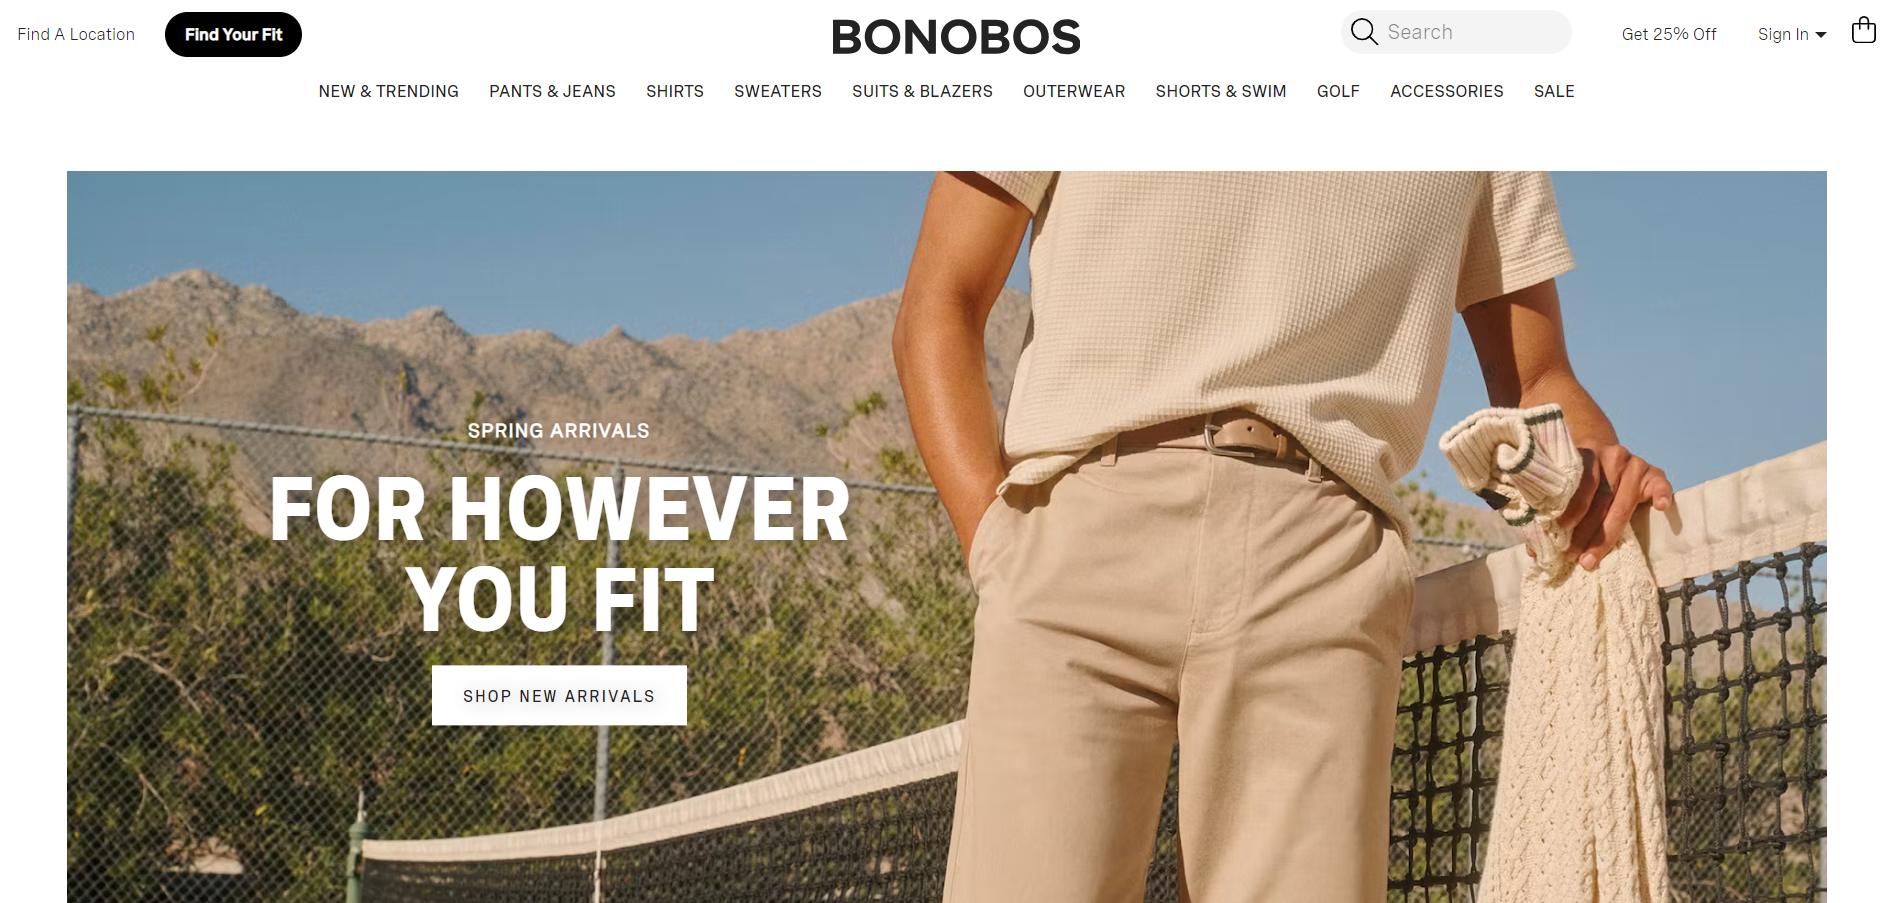 The image shows a Screenshot of Bonobos' focus on providing a better fit for men's clothing, and its website is designed to support this mission. 